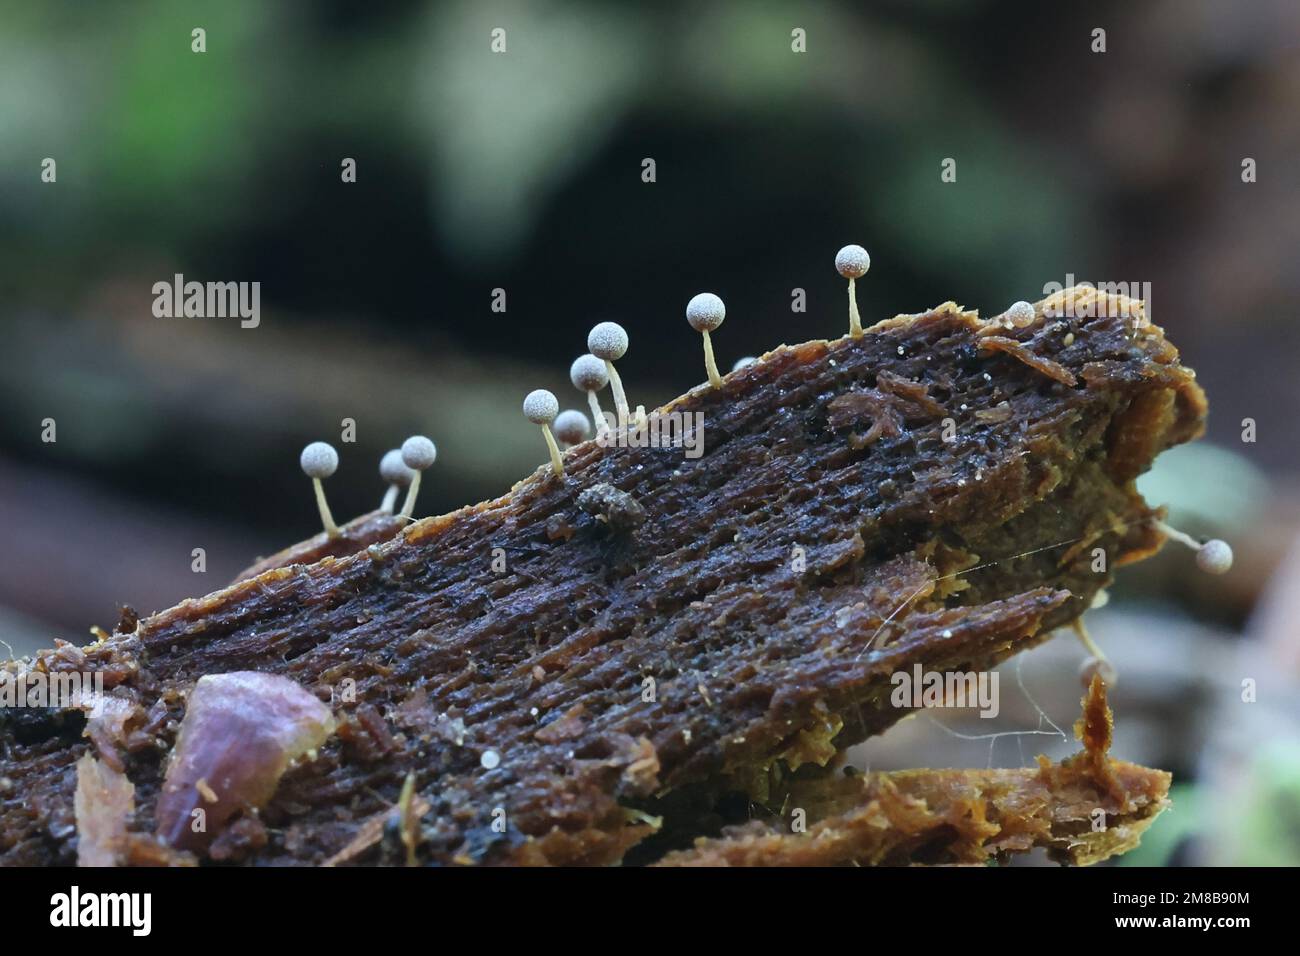 Physarum leucopus, a slime mold from Finland, no common English name Stock Photo